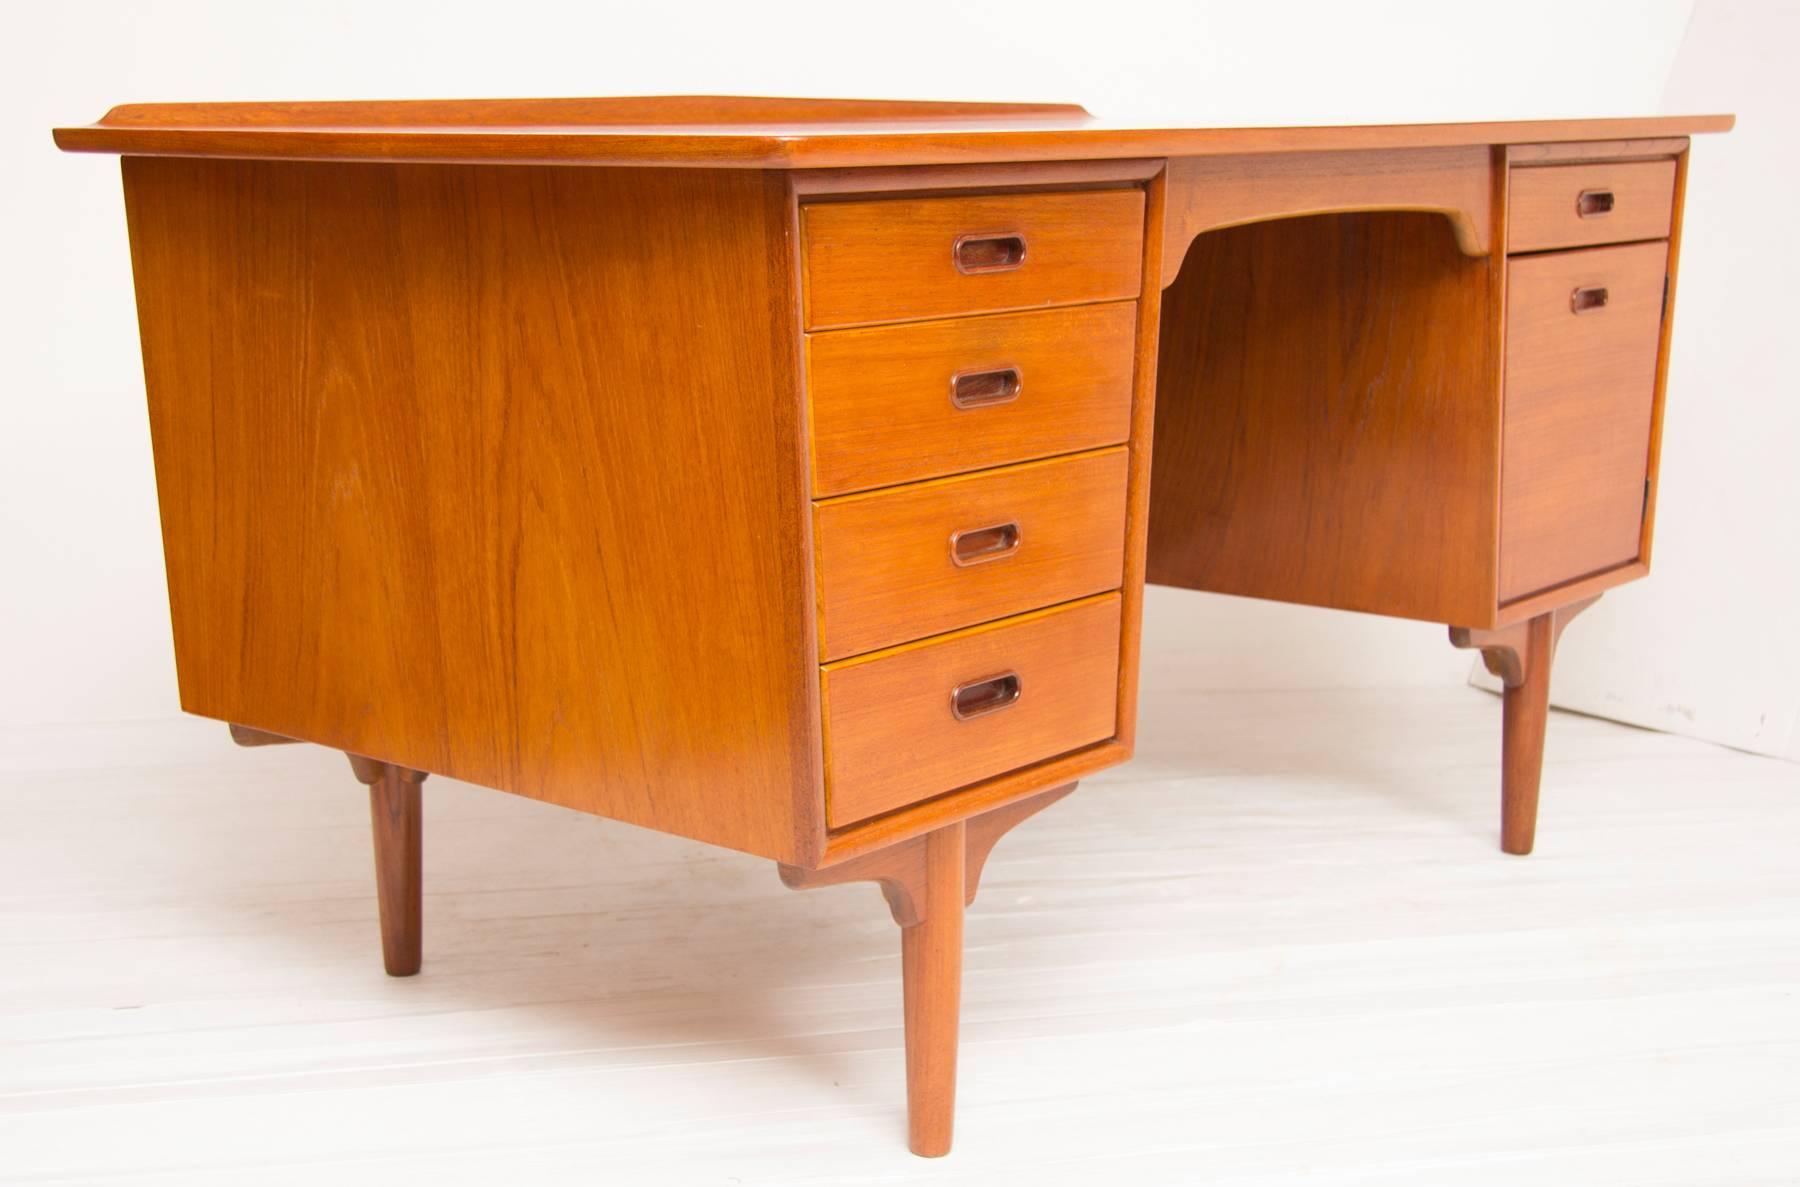 1960s teak desk with four drawers to the left and a door with drawer above to the right. To the rear there is a full length book shelf.